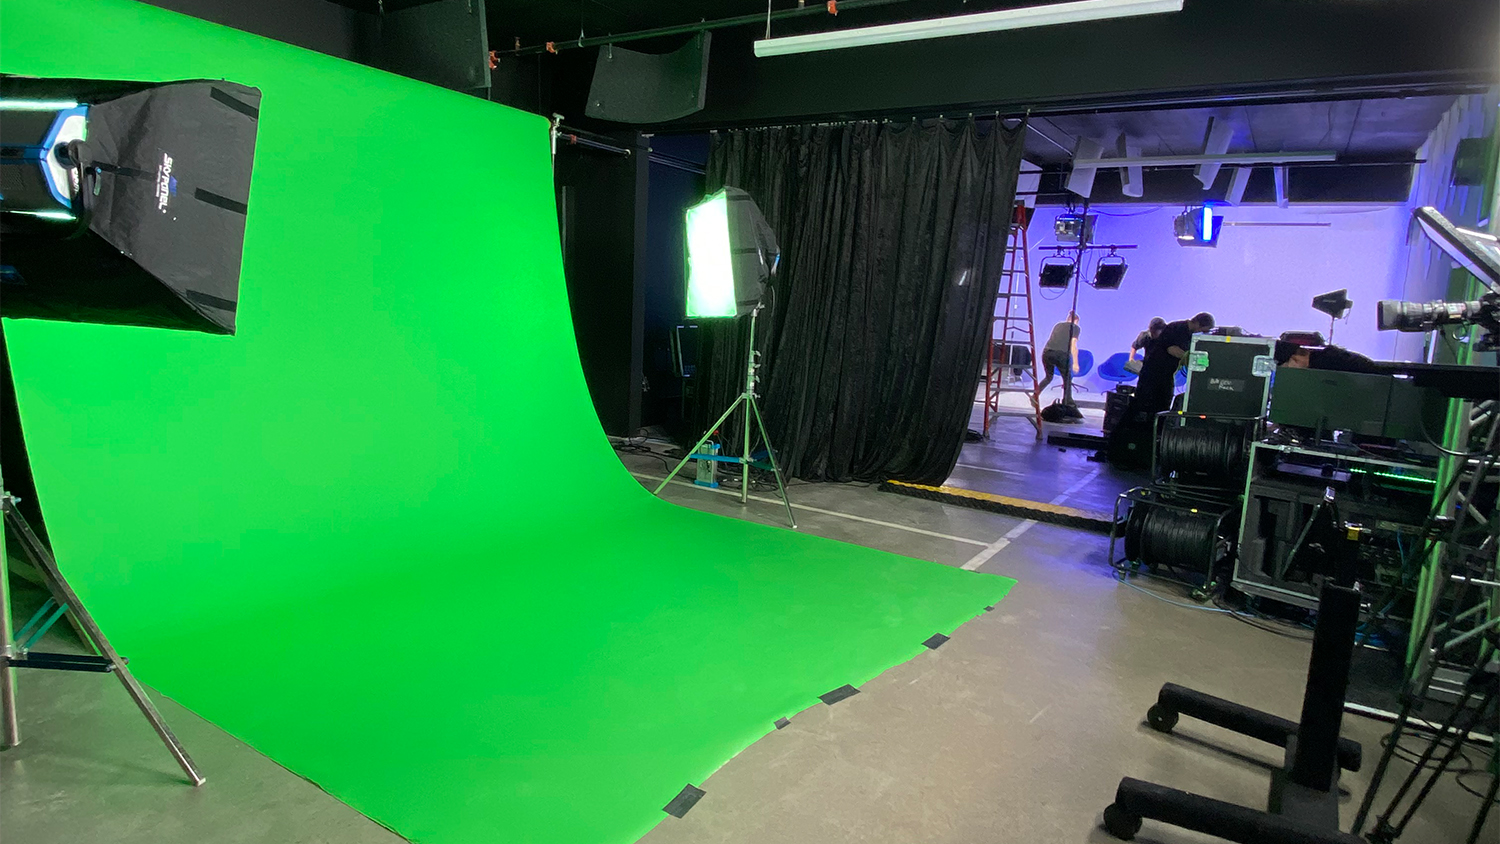 Two studios become one large rental space for large production or events. Showing green screen and cyc wall in the background combined as one open concept room.